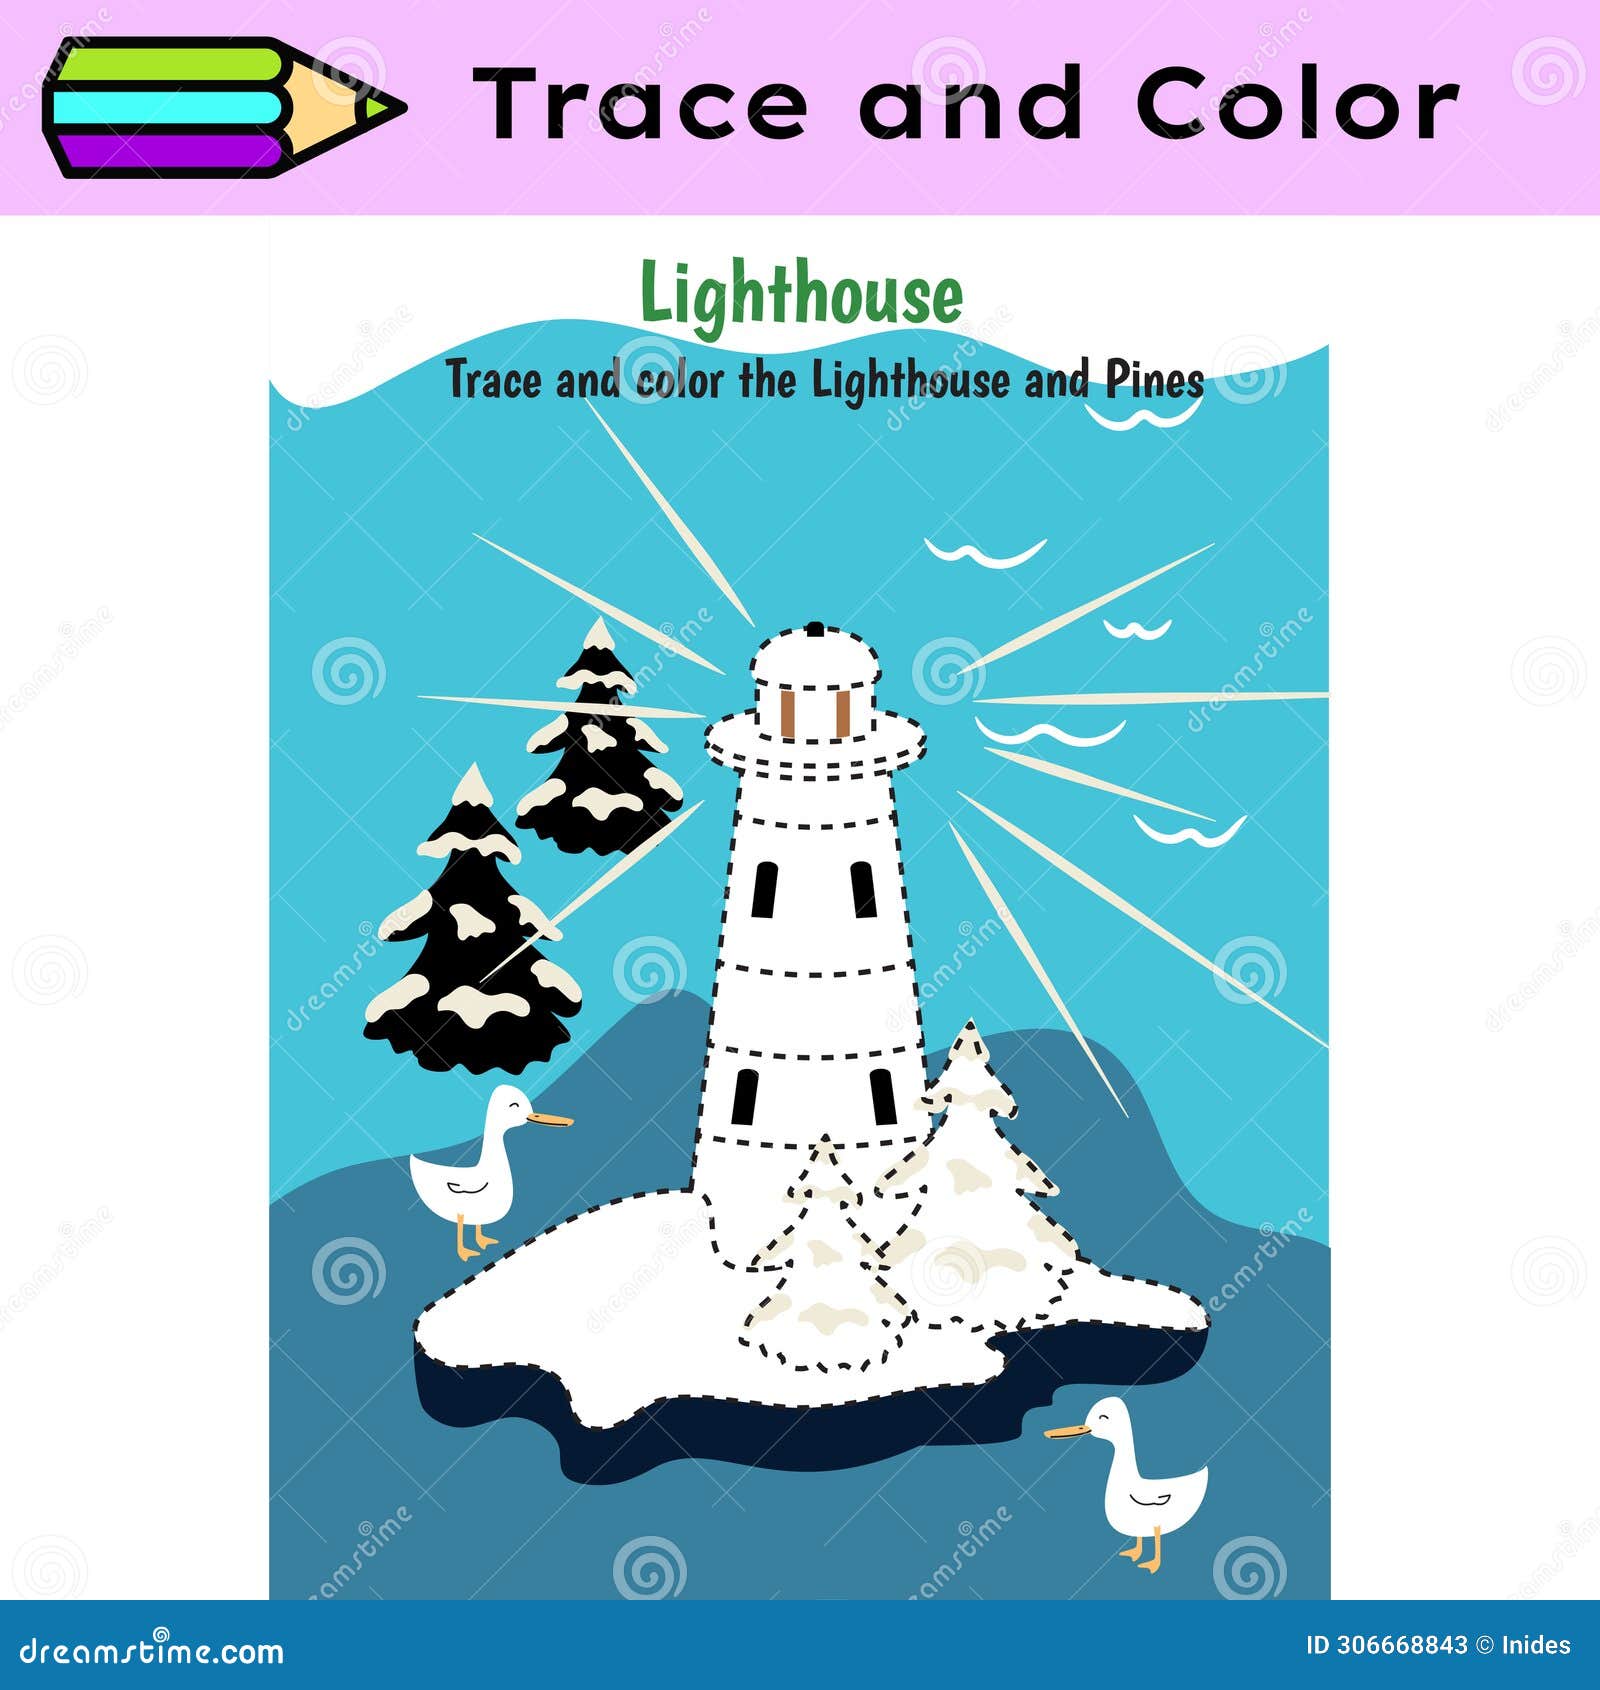 pen tracing lines activity worksheet for children. pencil control for kids practicing motoric skills. lighthouse